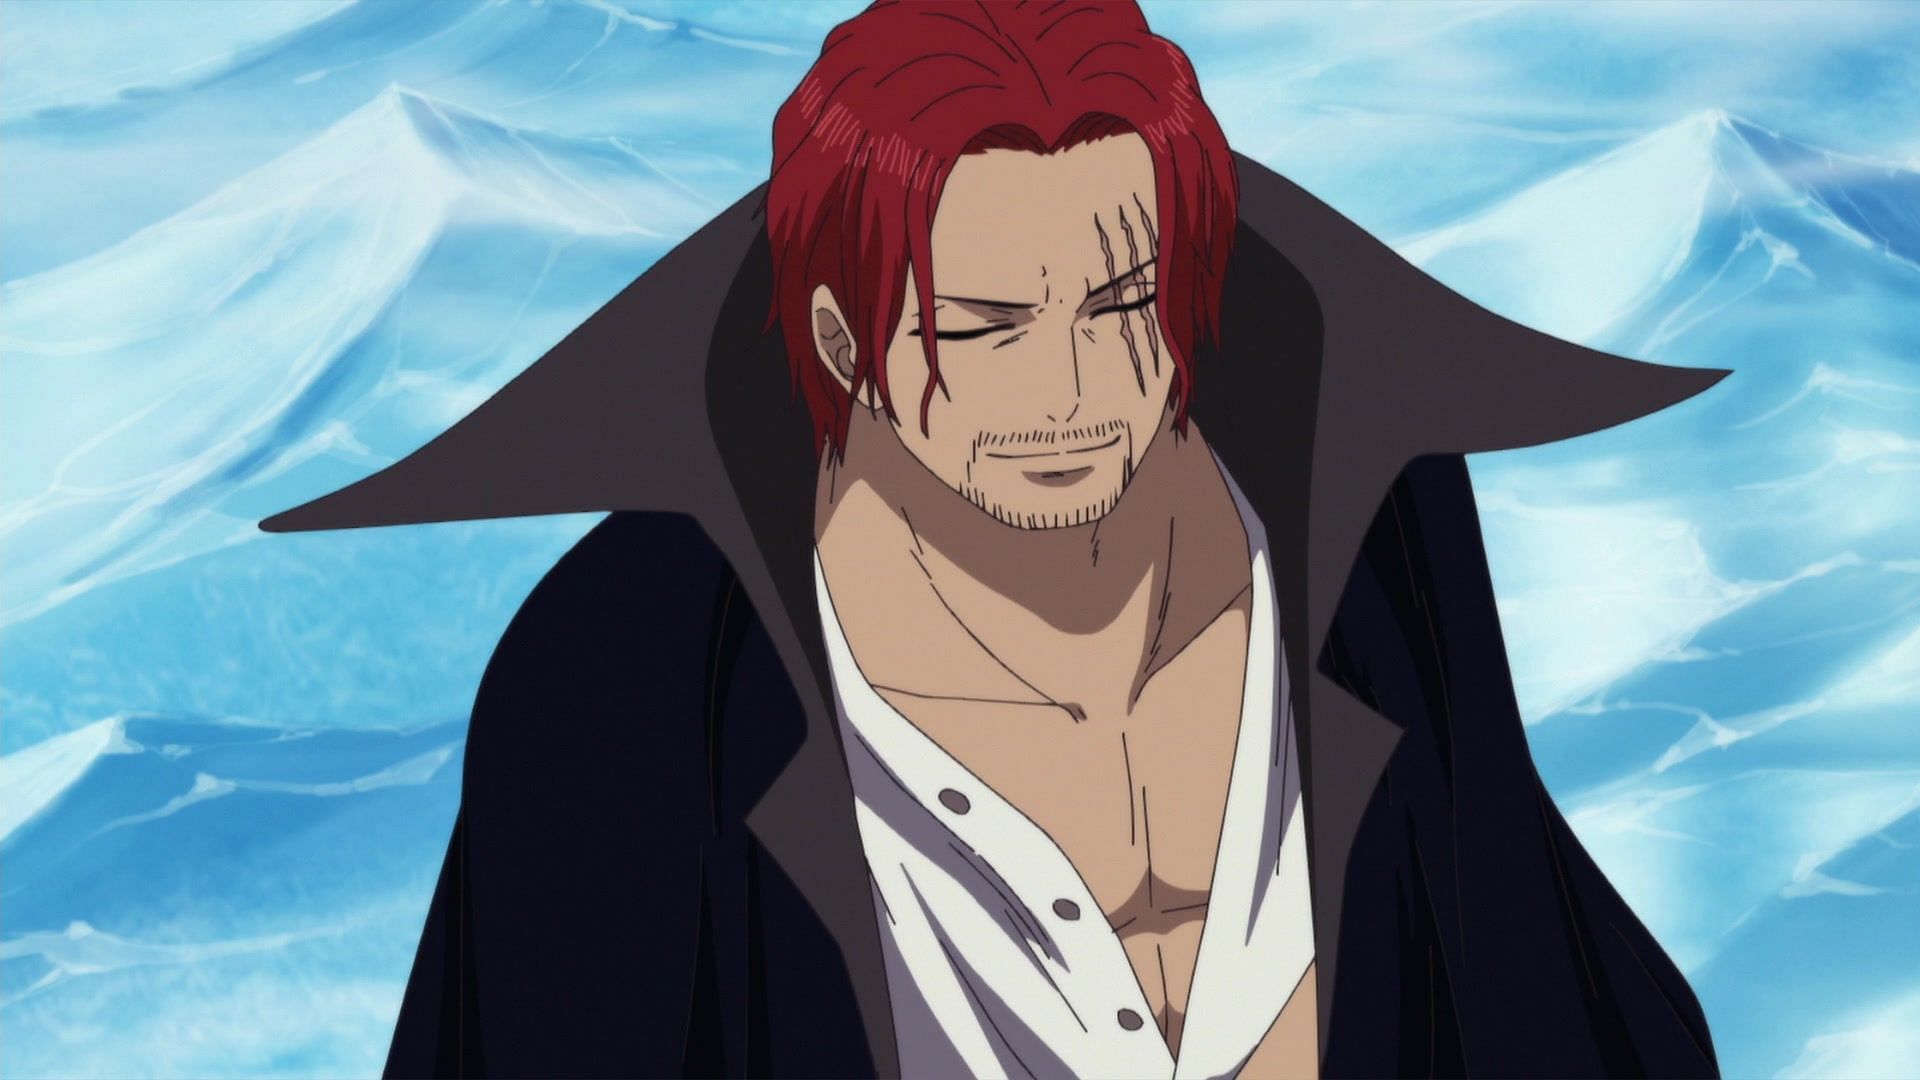 Shanks&#039; sudden appearance and departure in One Piece Chapter 1055 has fans wondering if ulterior motives are afoot (Image Credits: Eiichiro Oda/Shueisha, Viz Media, One Piece)